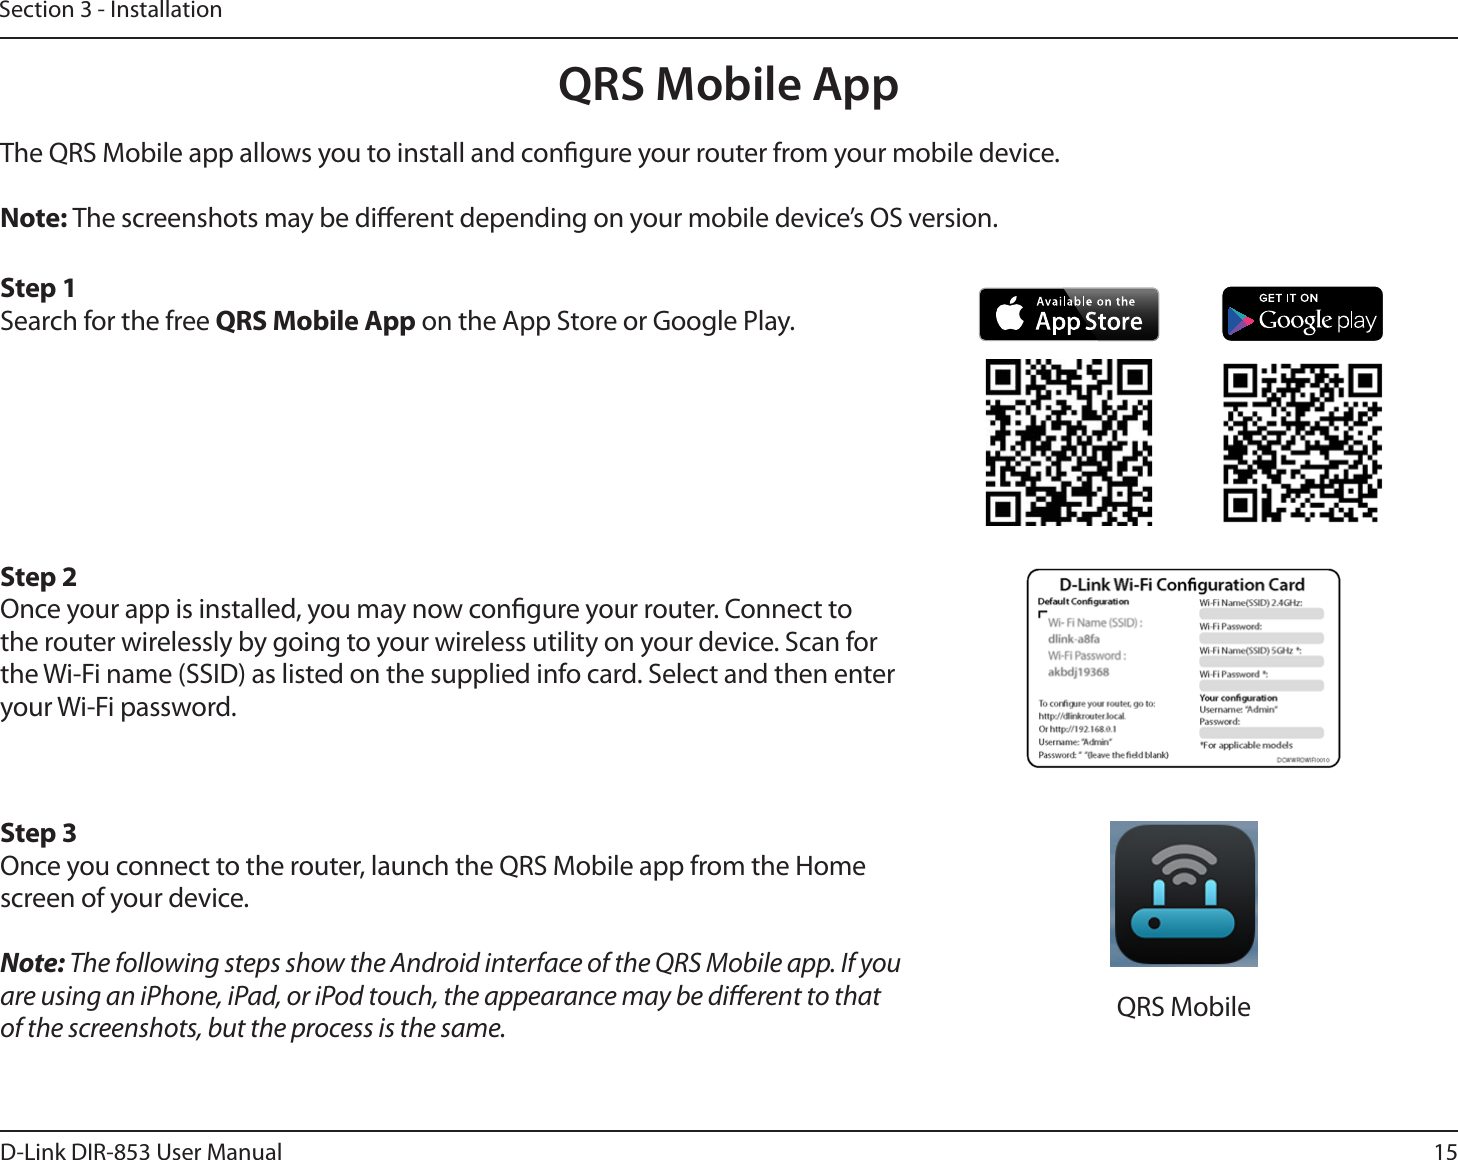 15D-Link DIR-853 User ManualSection 3 - InstallationQRS Mobile AppThe QRS Mobile app allows you to install and congure your router from your mobile device.Note: The screenshots may be dierent depending on your mobile device’s OS version. Step 1Search for the free QRS Mobile App on the App Store or Google Play.Step 2Once your app is installed, you may now congure your router. Connect to the router wirelessly by going to your wireless utility on your device. Scan for the Wi-Fi name (SSID) as listed on the supplied info card. Select and then enter your Wi-Fi password.Step 3Once you connect to the router, launch the QRS Mobile app from the Home screen of your device.Note: The following steps show the Android interface of the QRS Mobile app. If you are using an iPhone, iPad, or iPod touch, the appearance may be dierent to that of the screenshots, but the process is the same. QRS Mobile